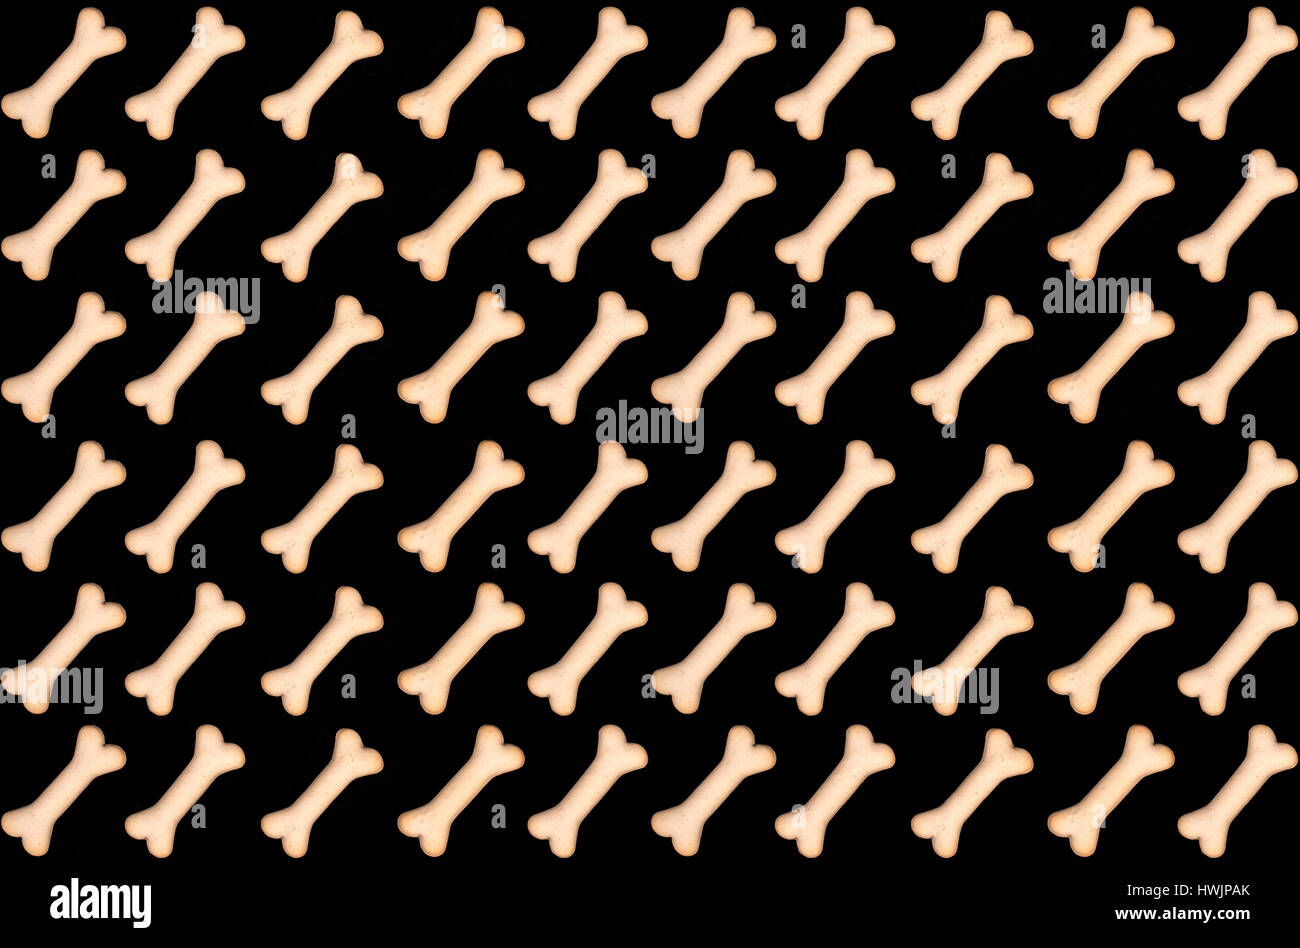 A seamless pattern of dog biscuits, in the shape of bones, isolated on black background. Stock Photo